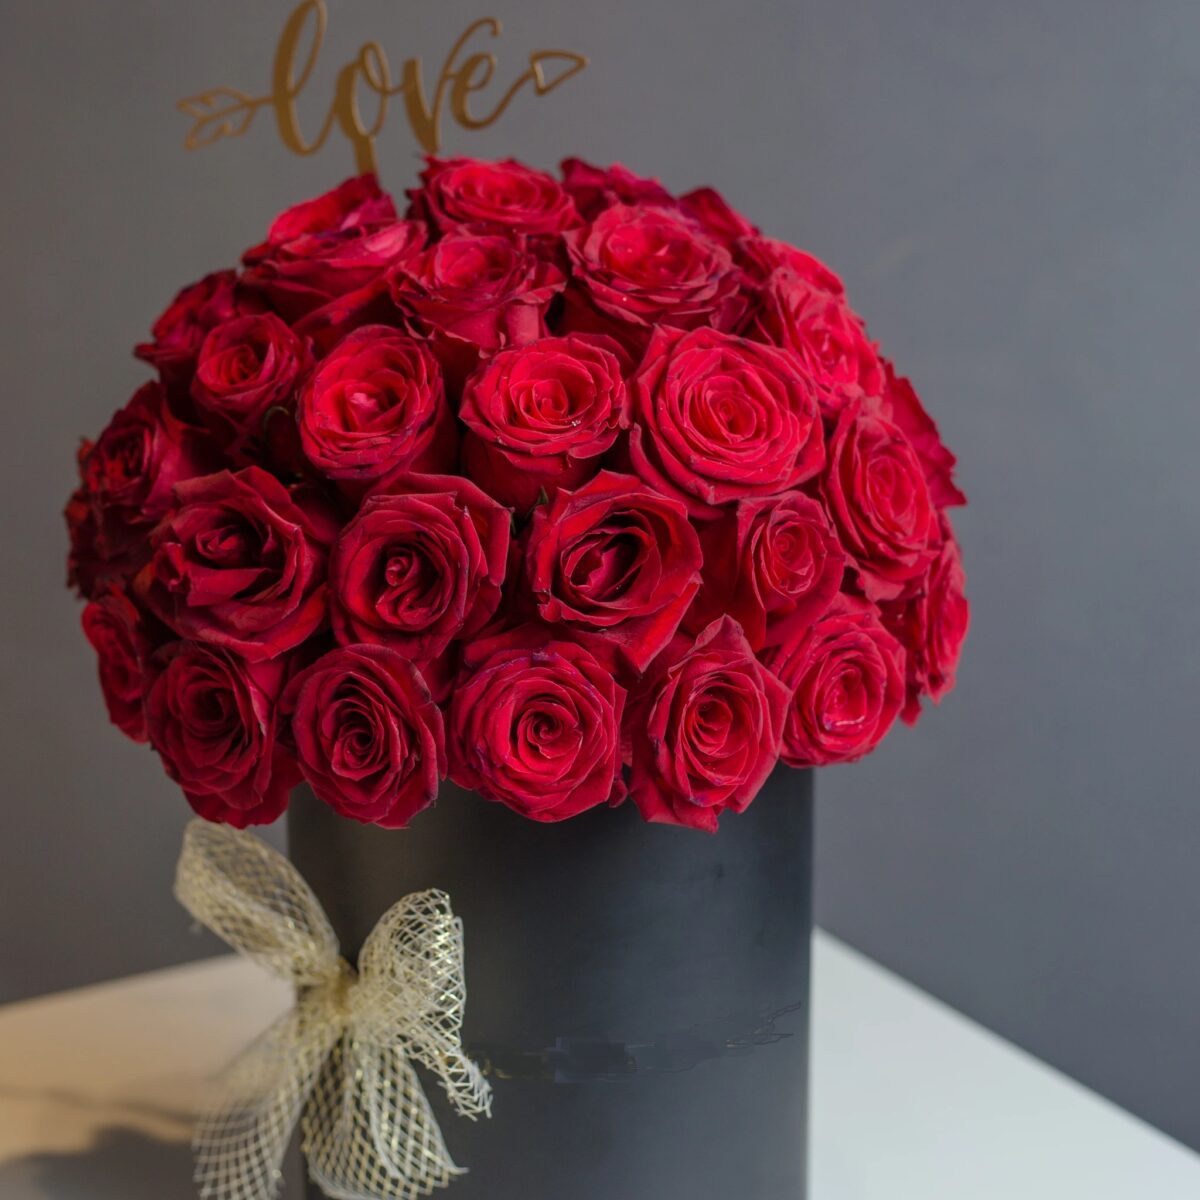 Send Flowers to Faisalabad - FromYouFlowers.pk